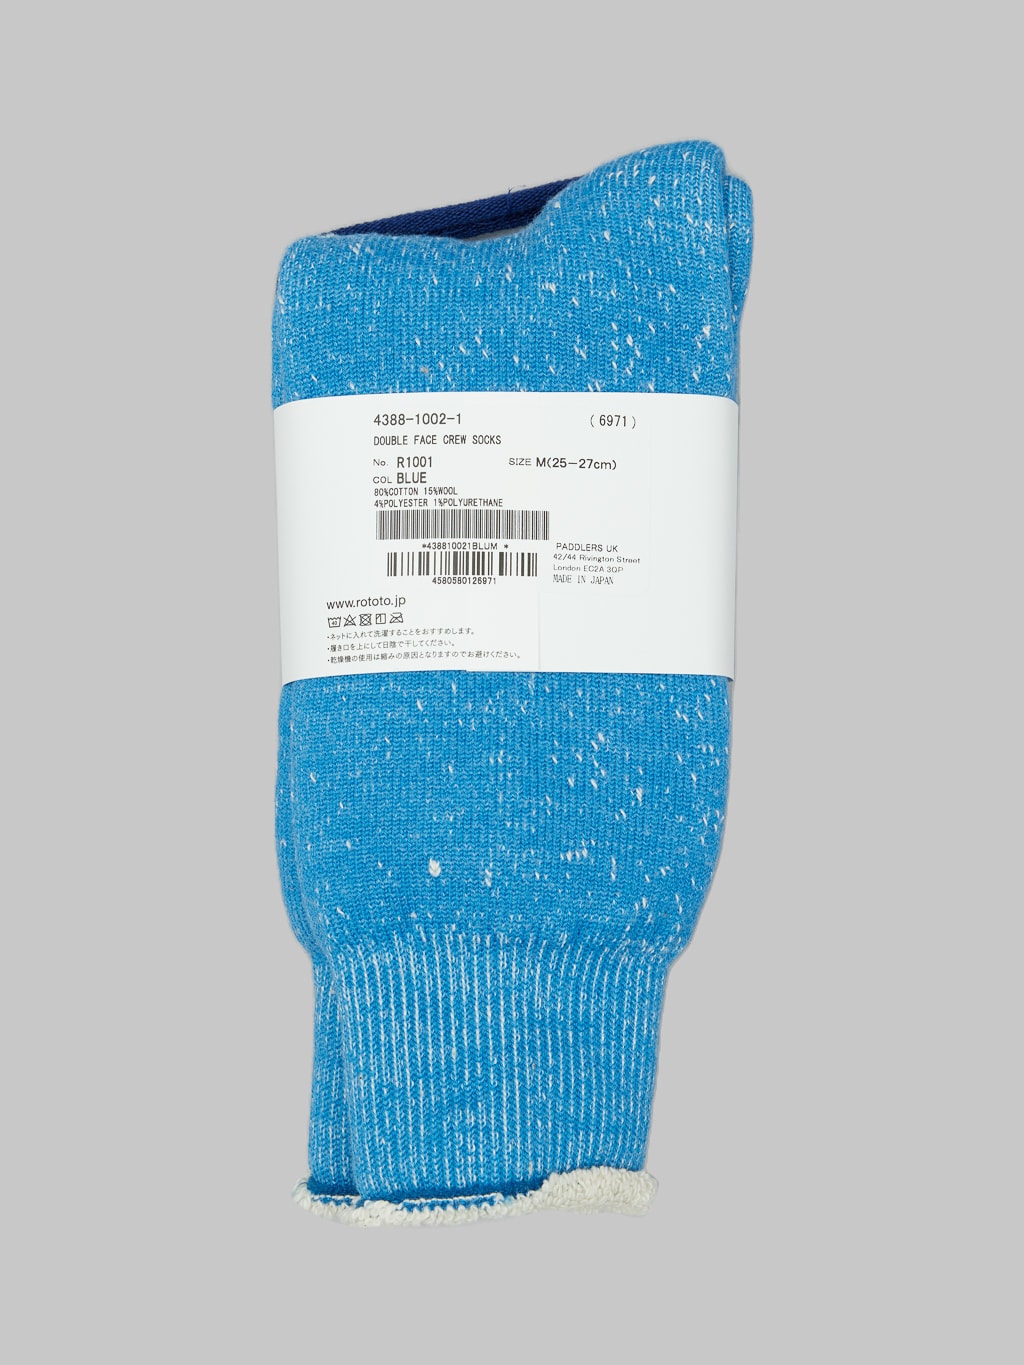 rototo double face crew socks cotton wool blue back label details